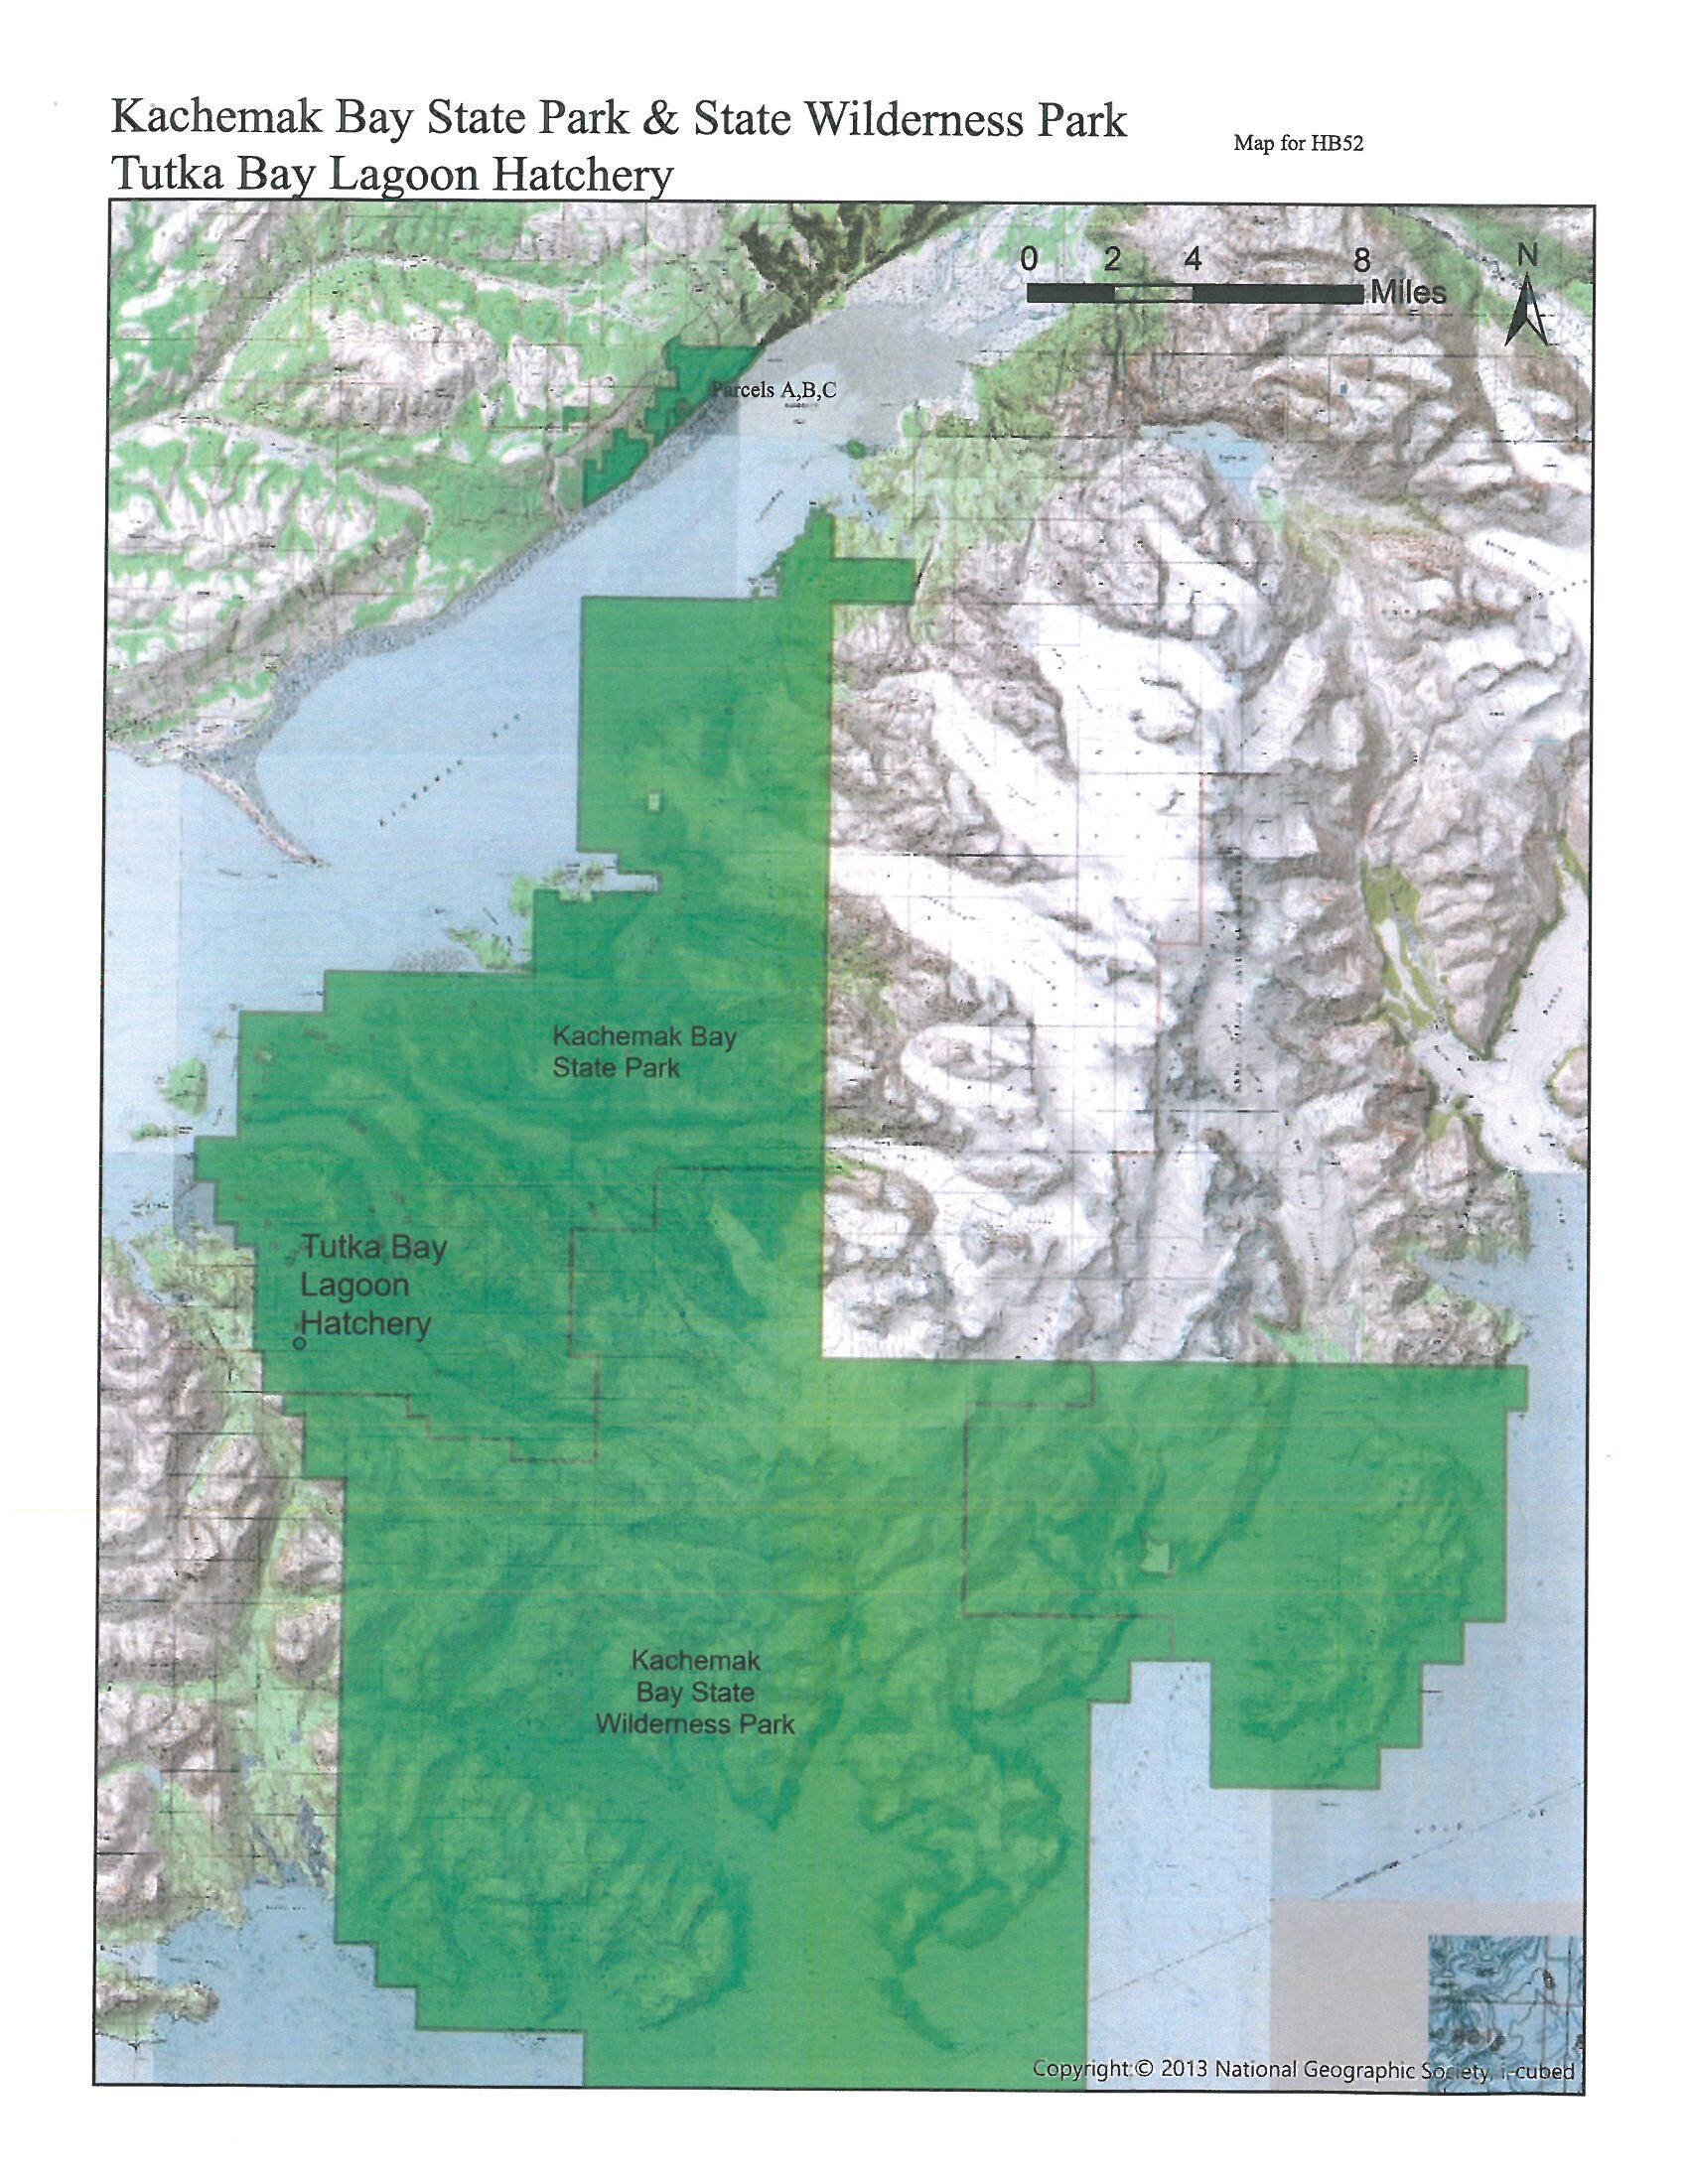 A map of Kachemak Bay State Park showing proposed land additions A, B and C in House Bill 52 and the Tutka Bay Lagoon Hatchery. (Map courtesy of Alaska State Parks)